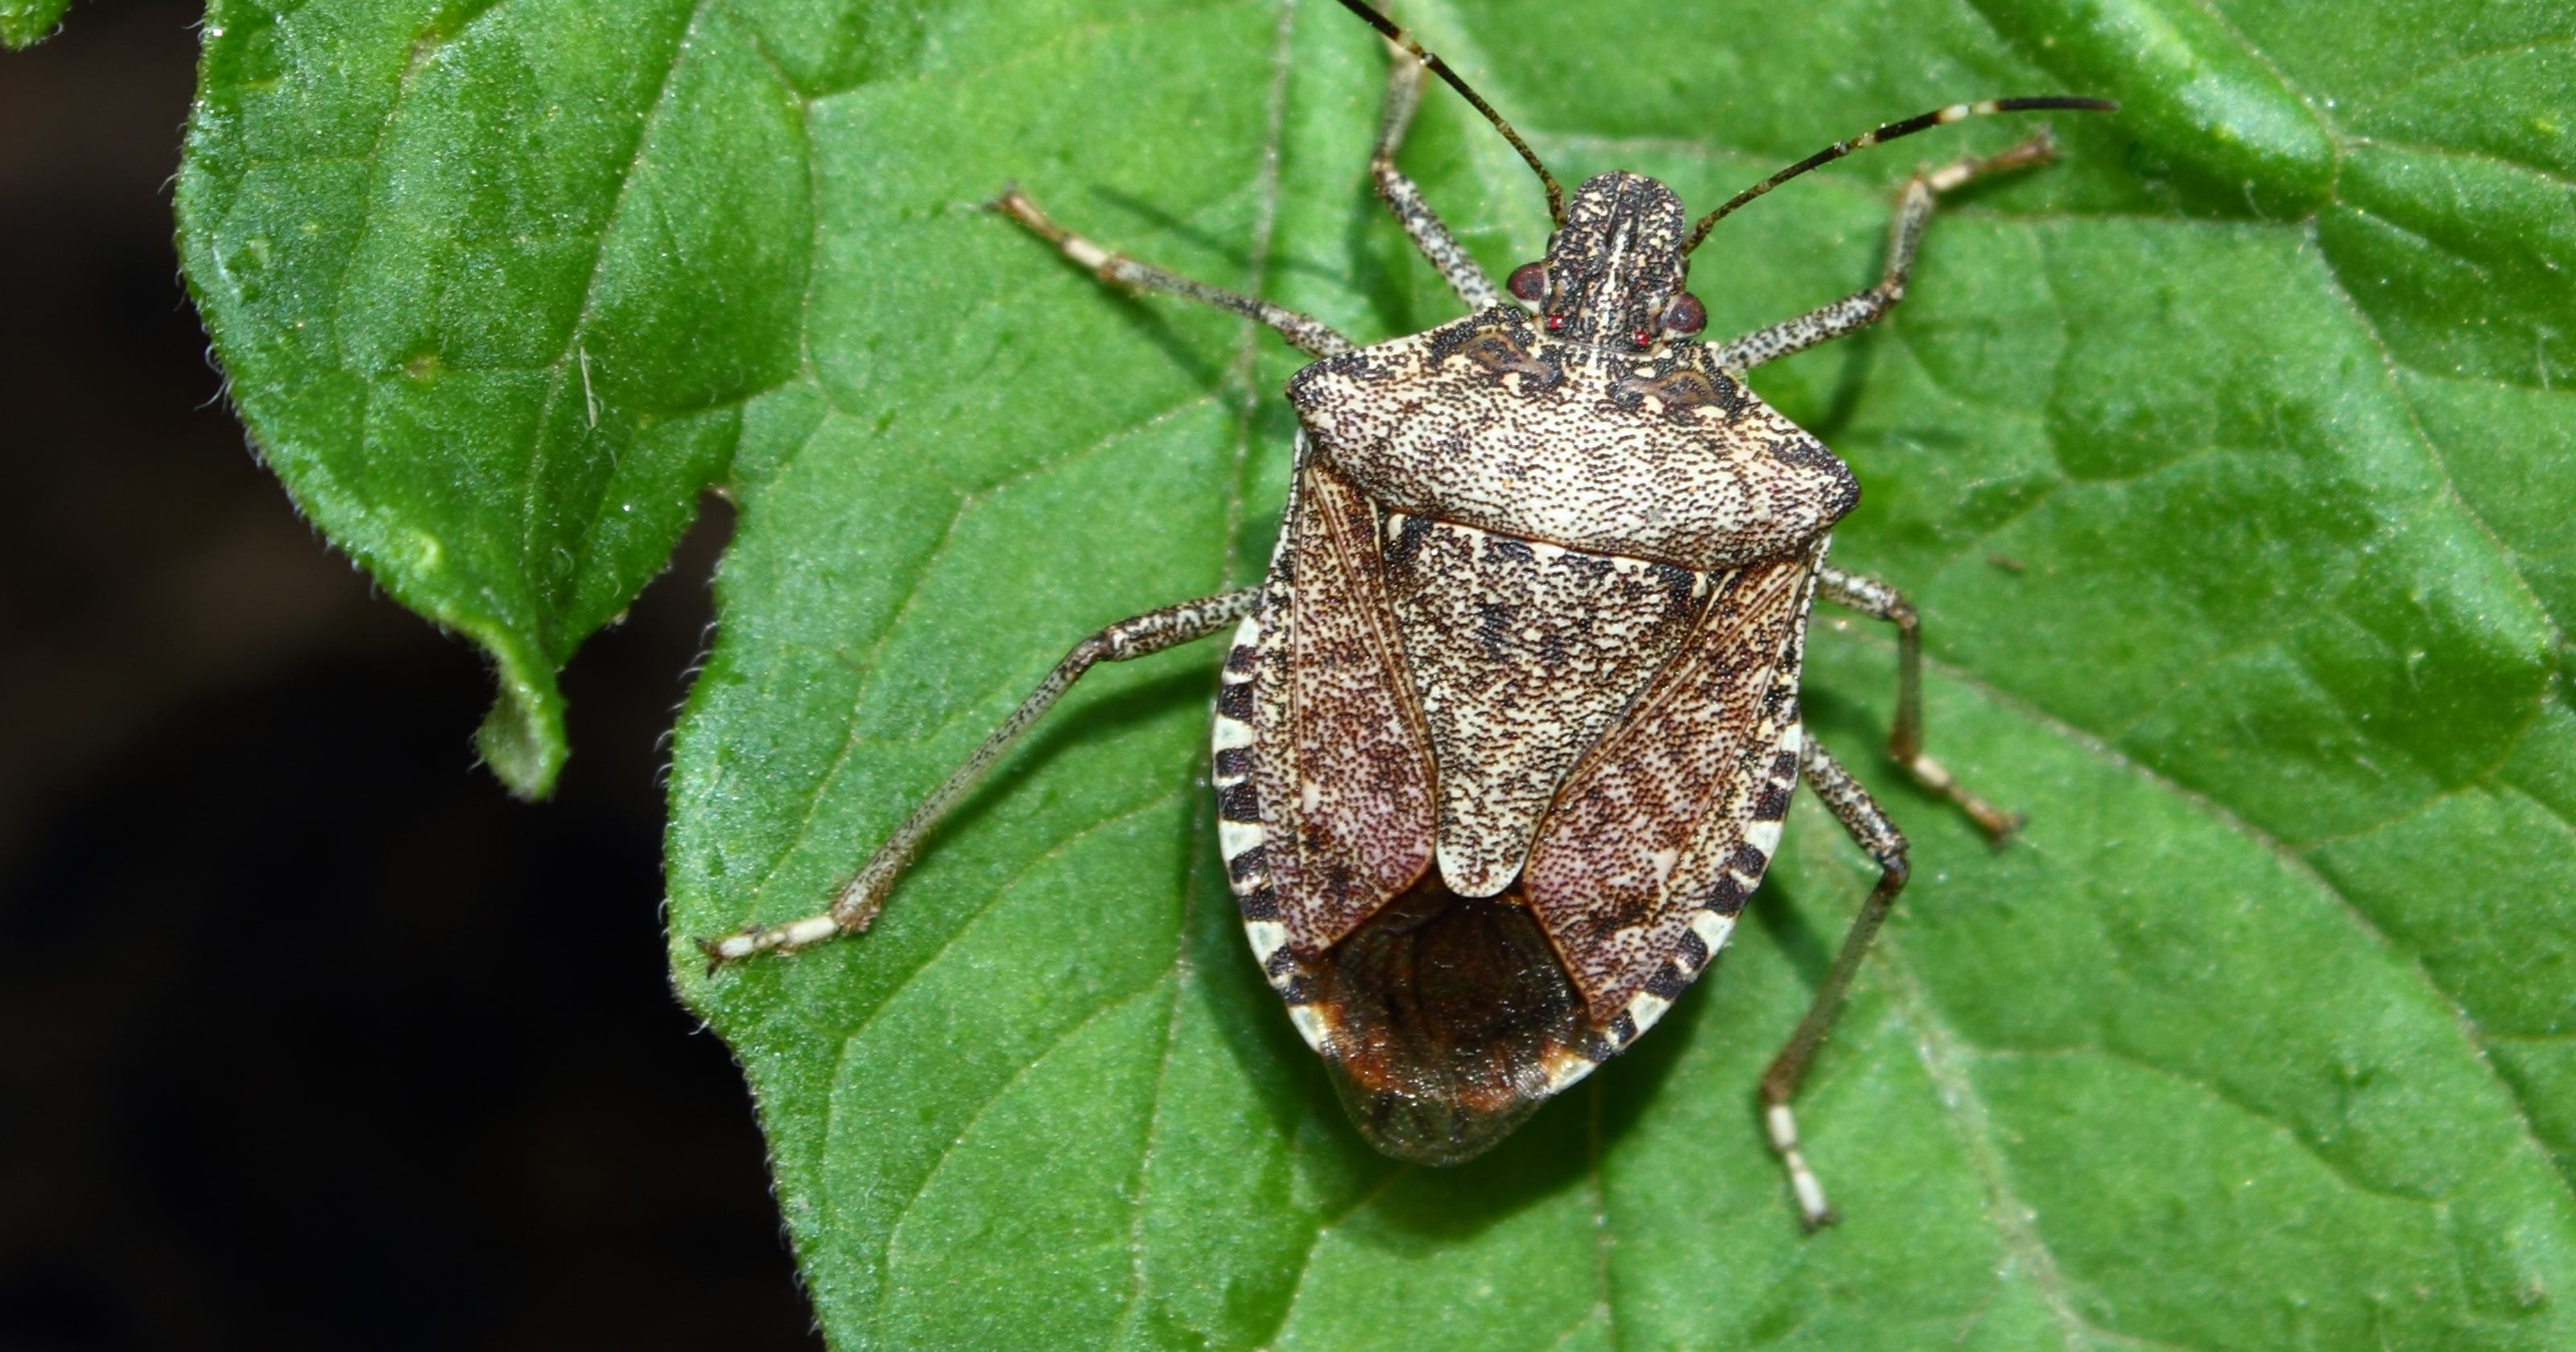 stink-bugs-are-back-how-to-get-rid-of-them-what-you-need-to-know